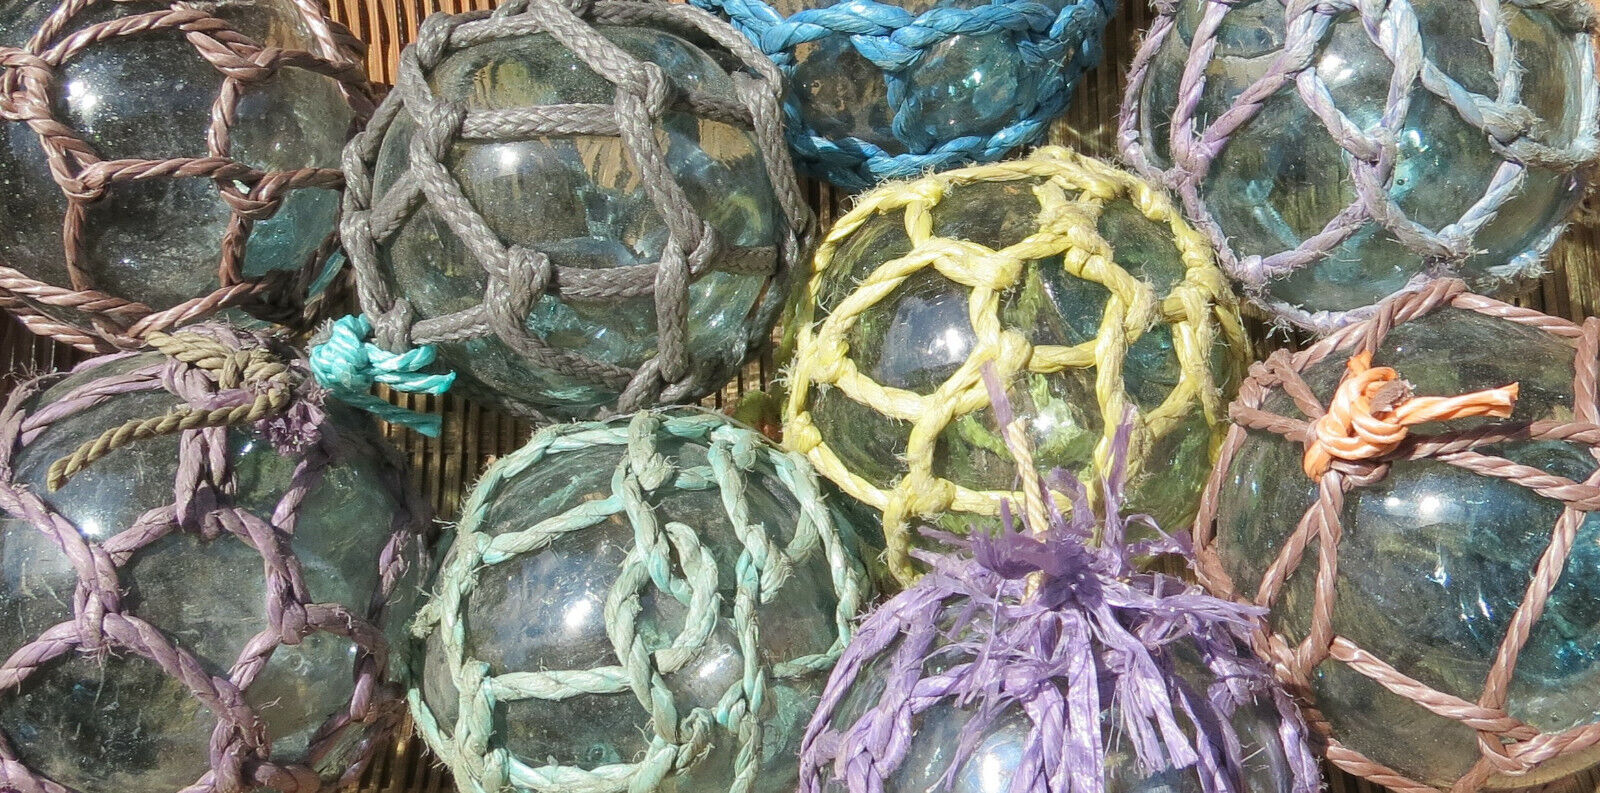 Japanese Glass Fishing FLOATS 3" Netted LOT-9 Net Buoy Authentic Vintage! USA BZ Без бренда